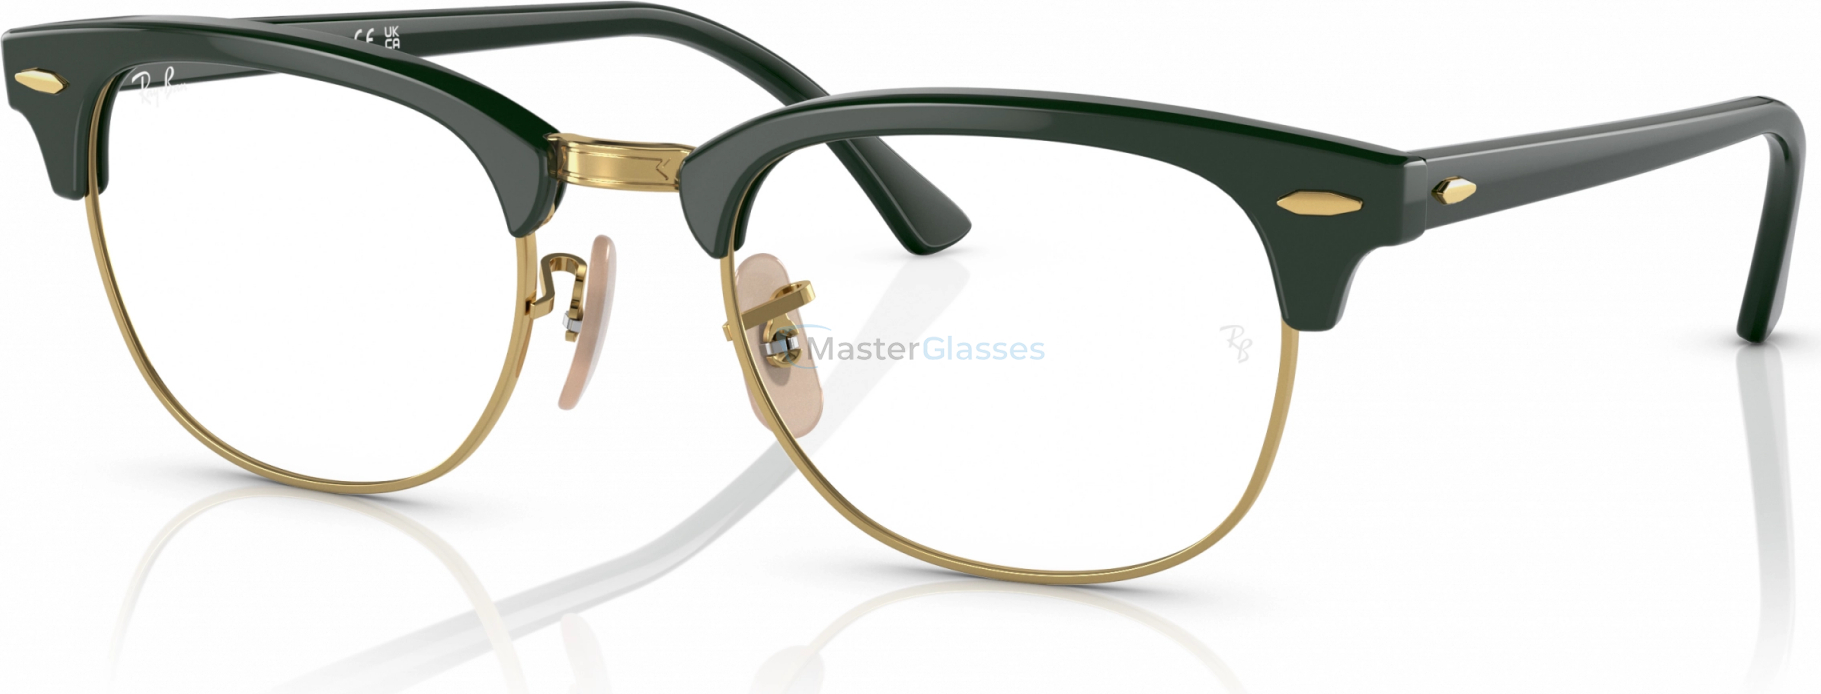  Ray-Ban Clubmaster RX5154 8233 Green On Arista